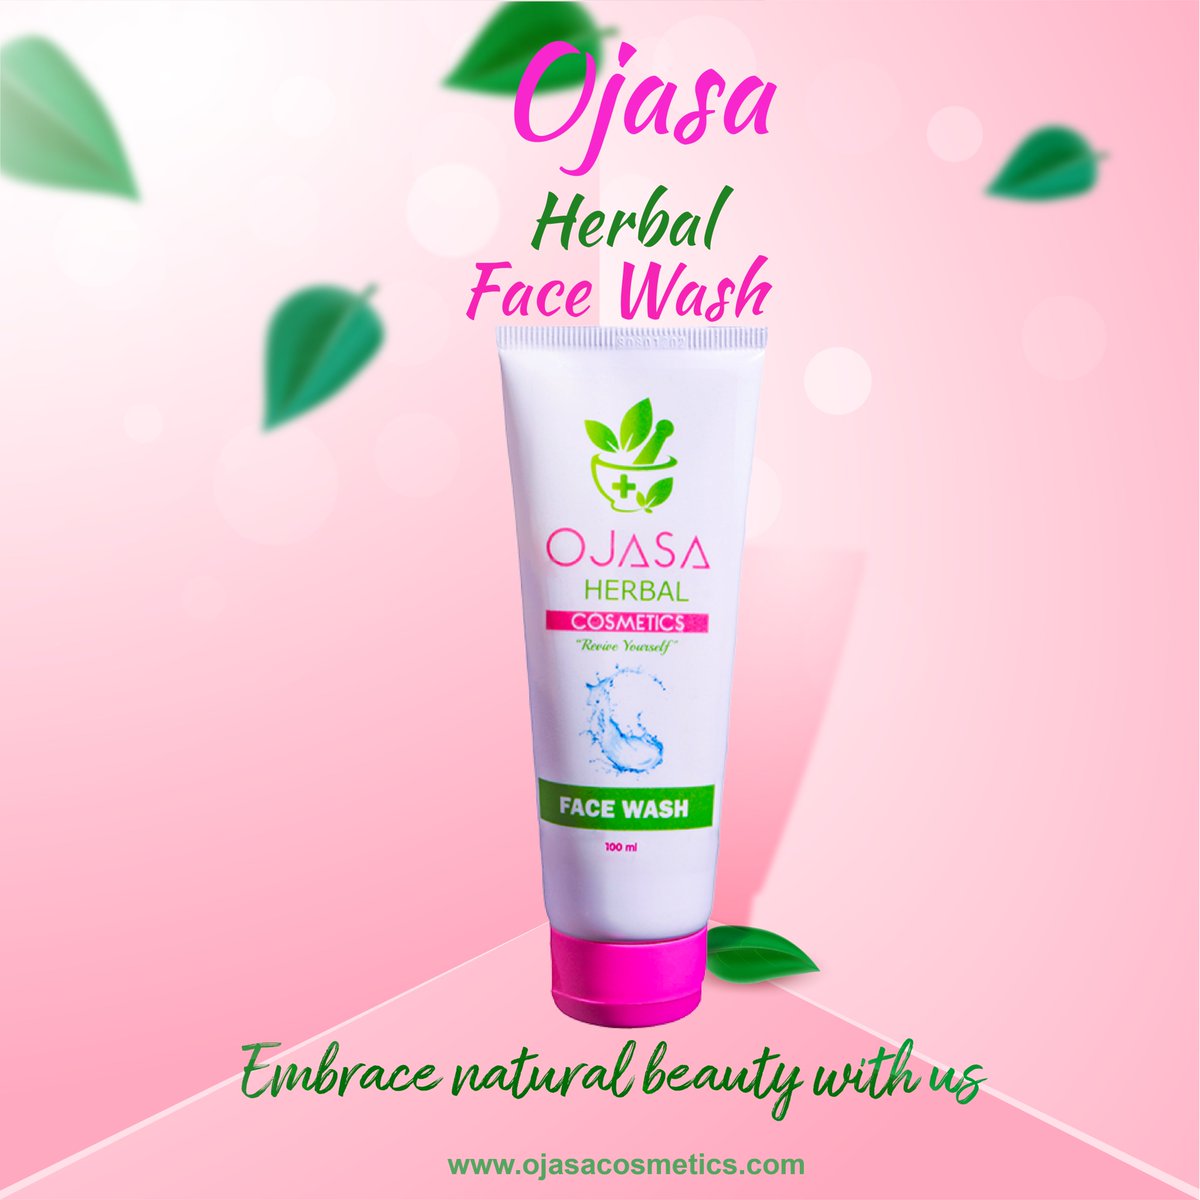 Experience the gentle power of nature with our Herbal Facewash for refreshed, radiant skin every day

ojasacosmetics.com

#herbalcosmetics #facewash #herbalfacewash #smoothskin #skincare